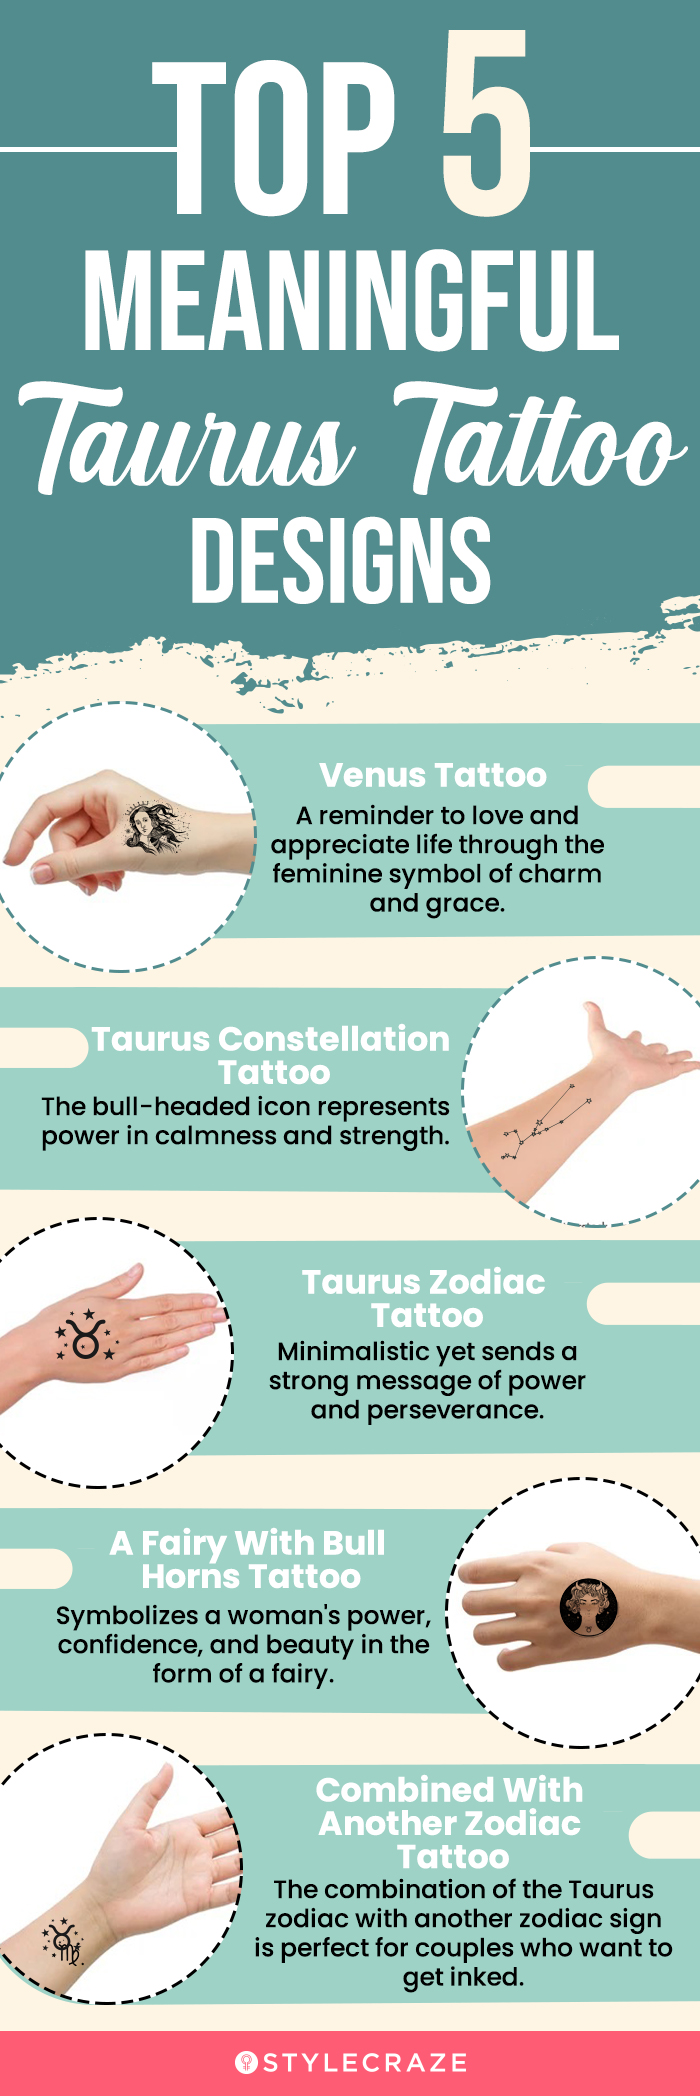 top 5 meaningful taurus tattoo designs (infographic)